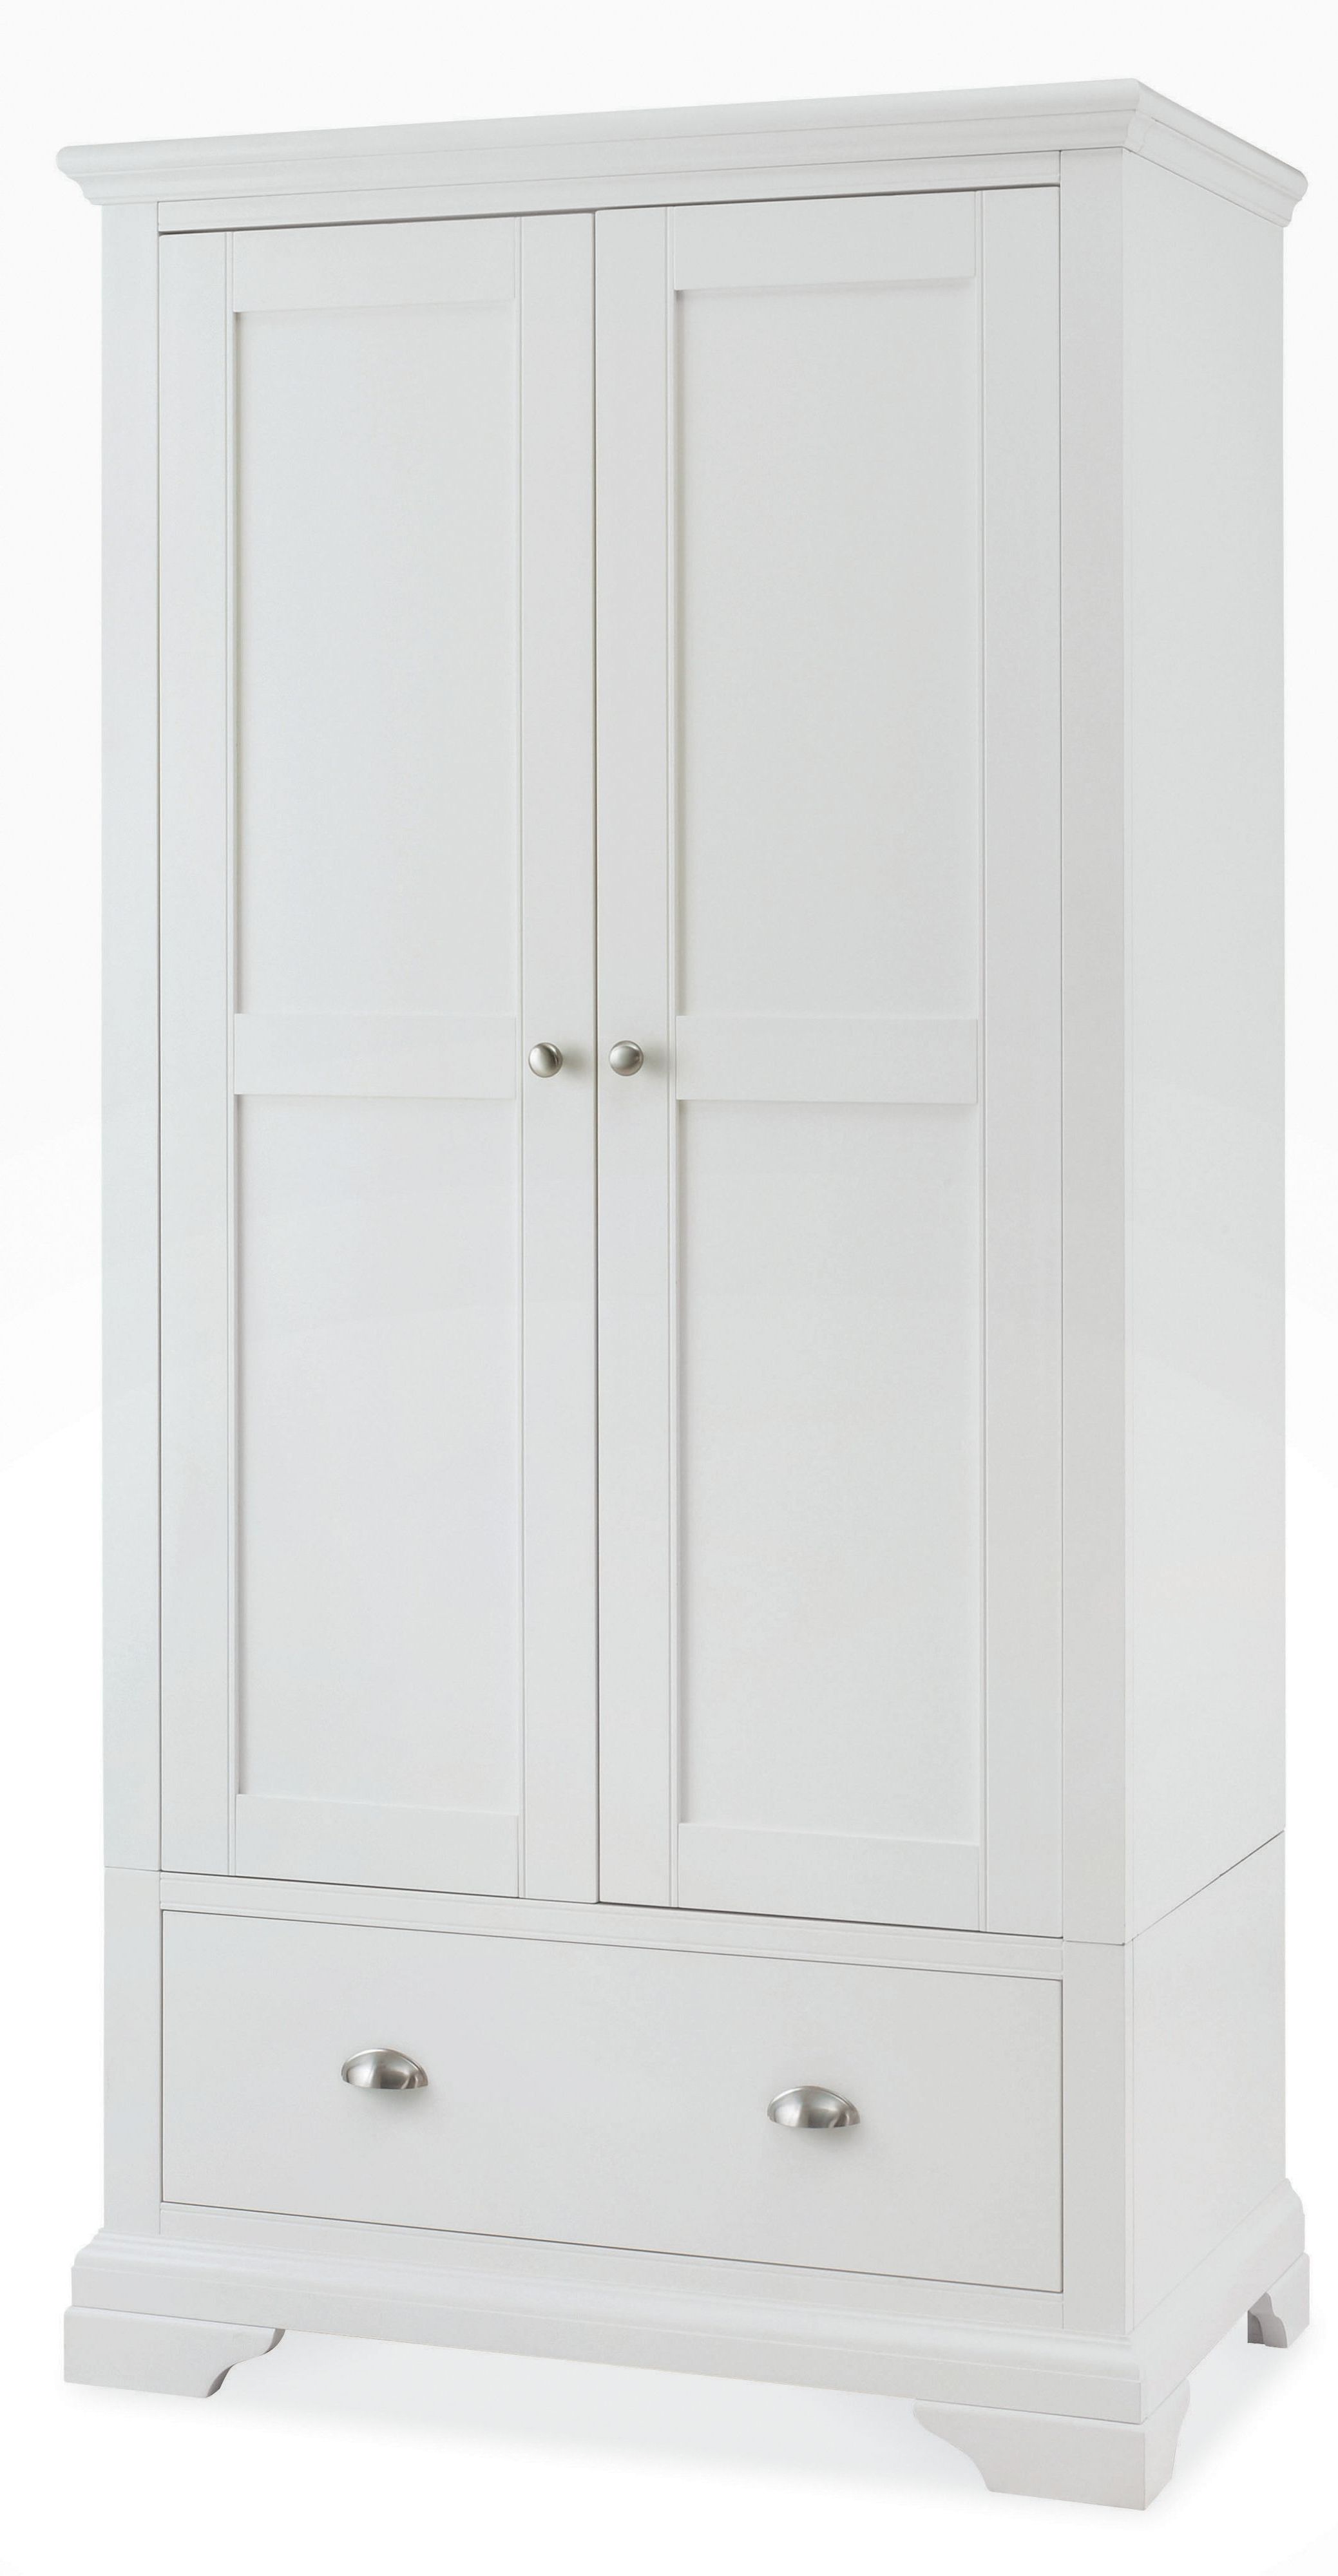 Cheap White Wardrobe With Drawers 3 Door Childrens And Set This Regarding Well Known Cheap White Wardrobes (View 7 of 15)